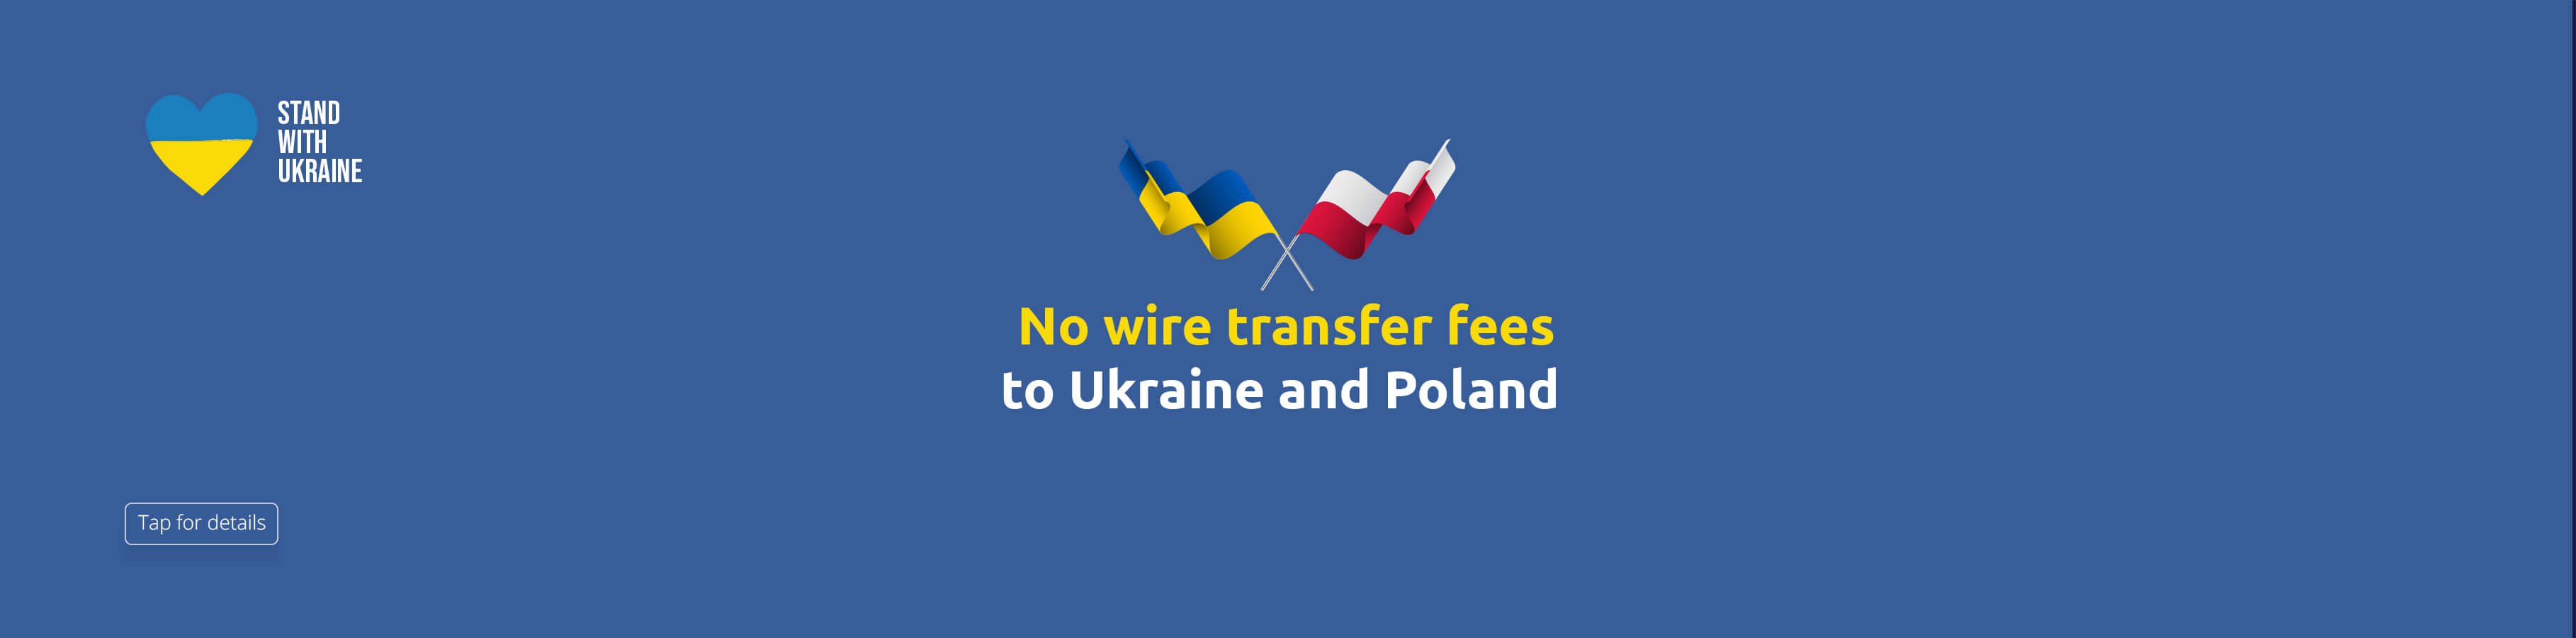 No transfer fees to Ukraine/ Tap for details 